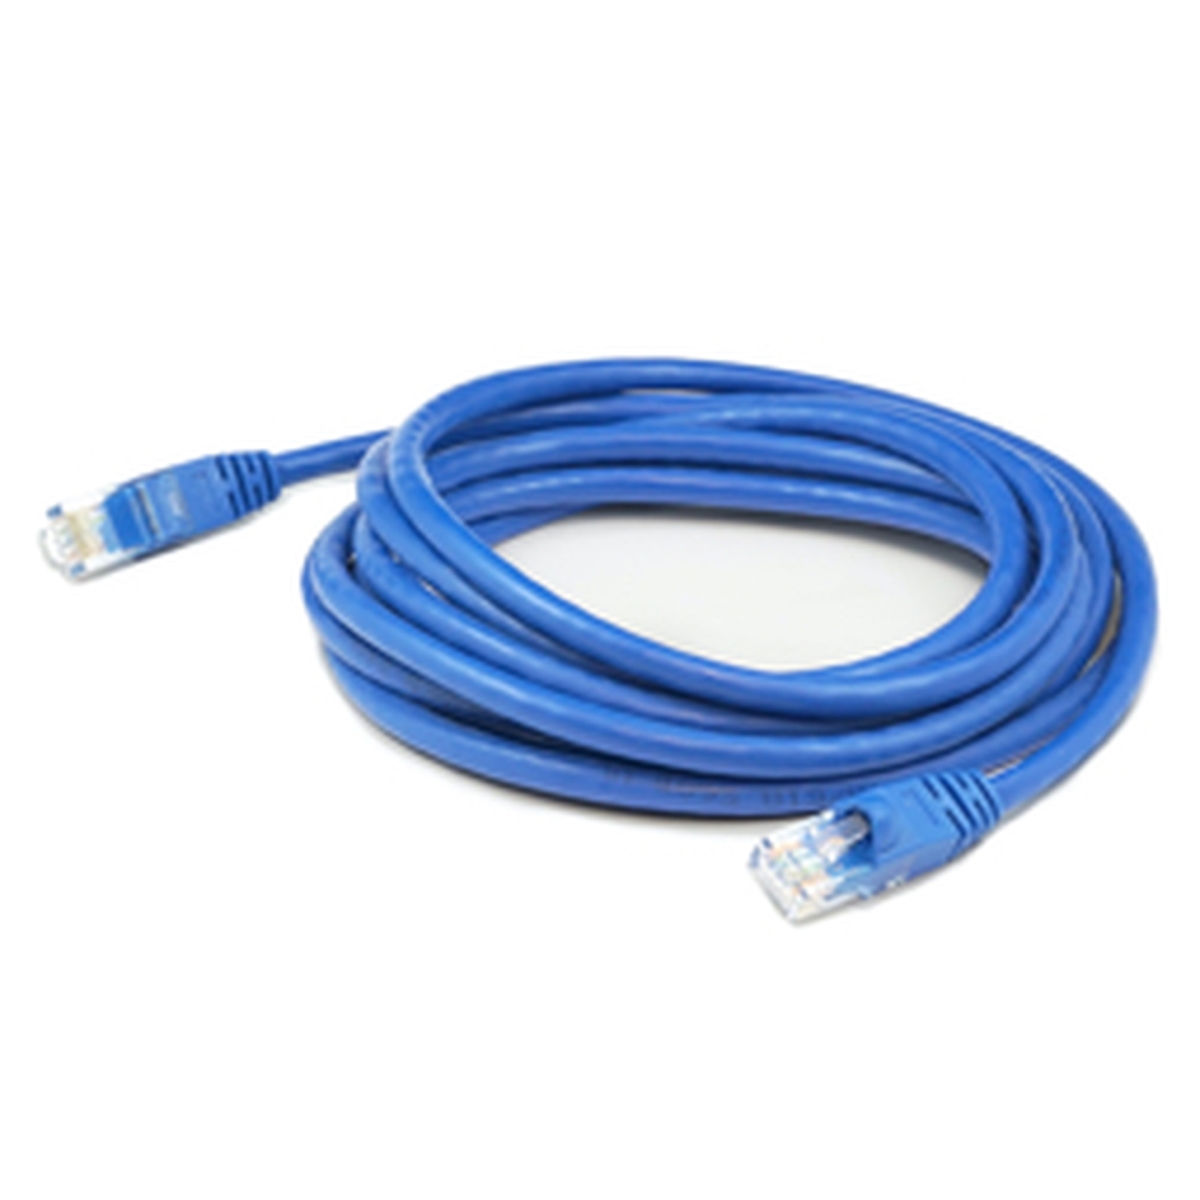 Picture of Add-On ADD-20FCAT7-BE 20 ft. RJ-45 Male to RJ-45 Male Straight Cat7 FTP Copper PVC Patch Cable - Blue